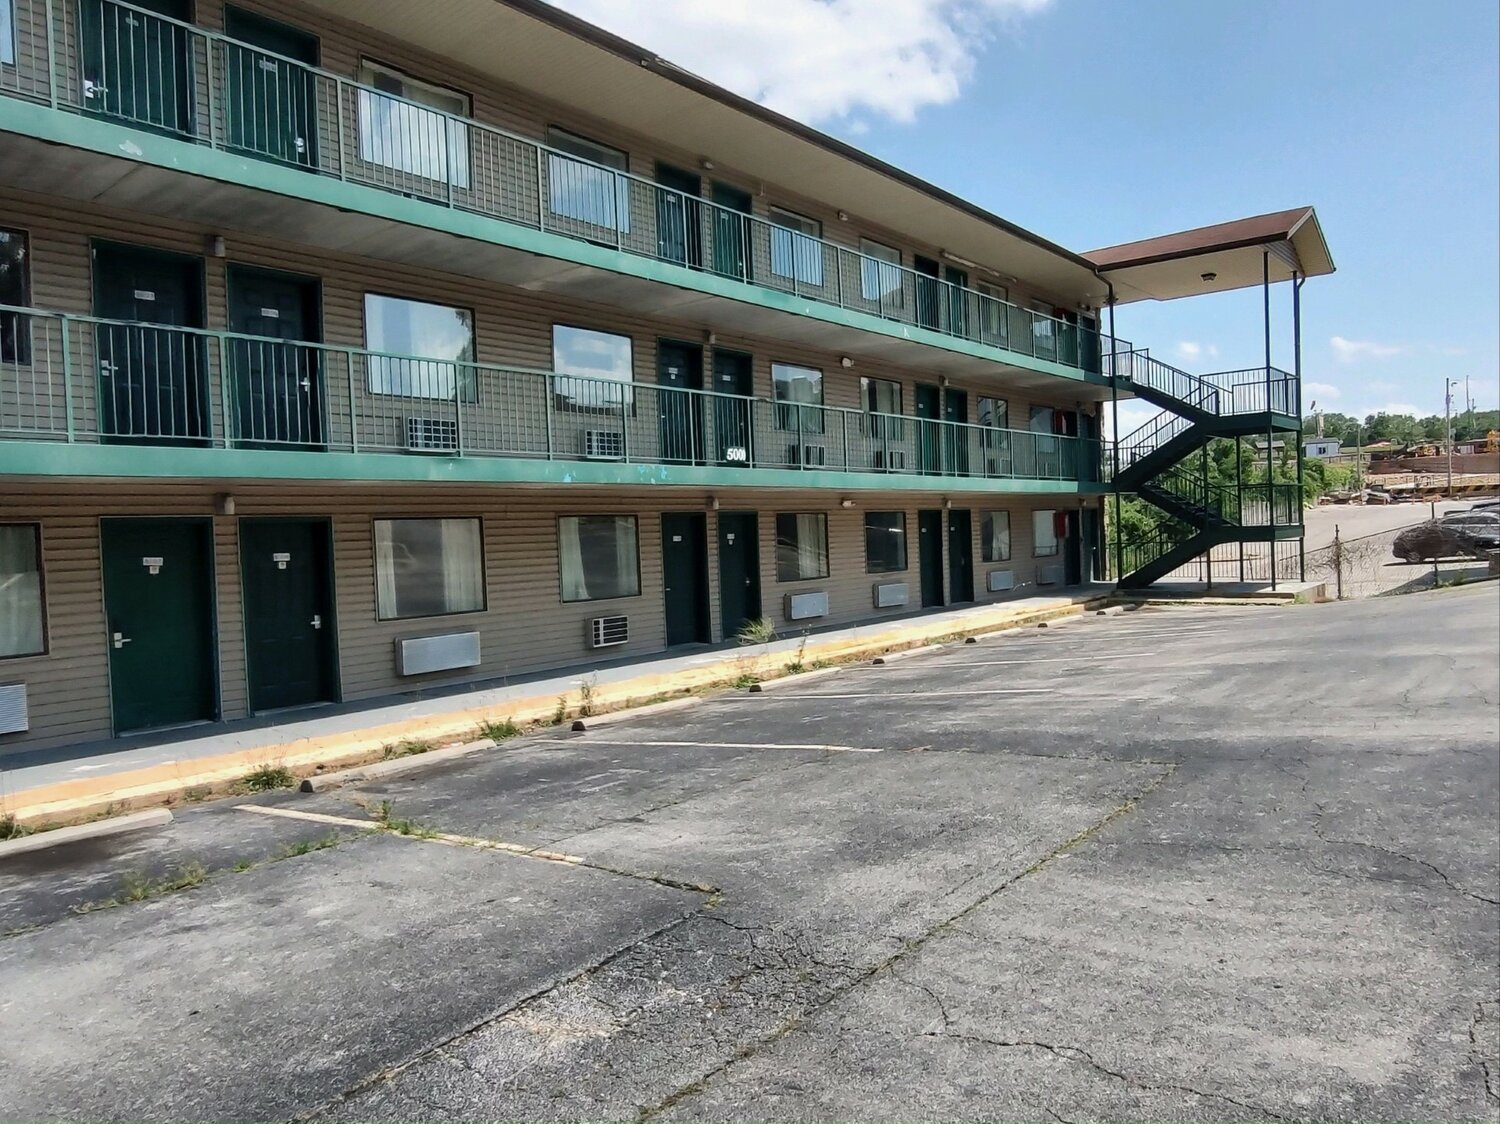 The former Hall of Fame Motel in Branson is planned to be renovated into an apartment complex.